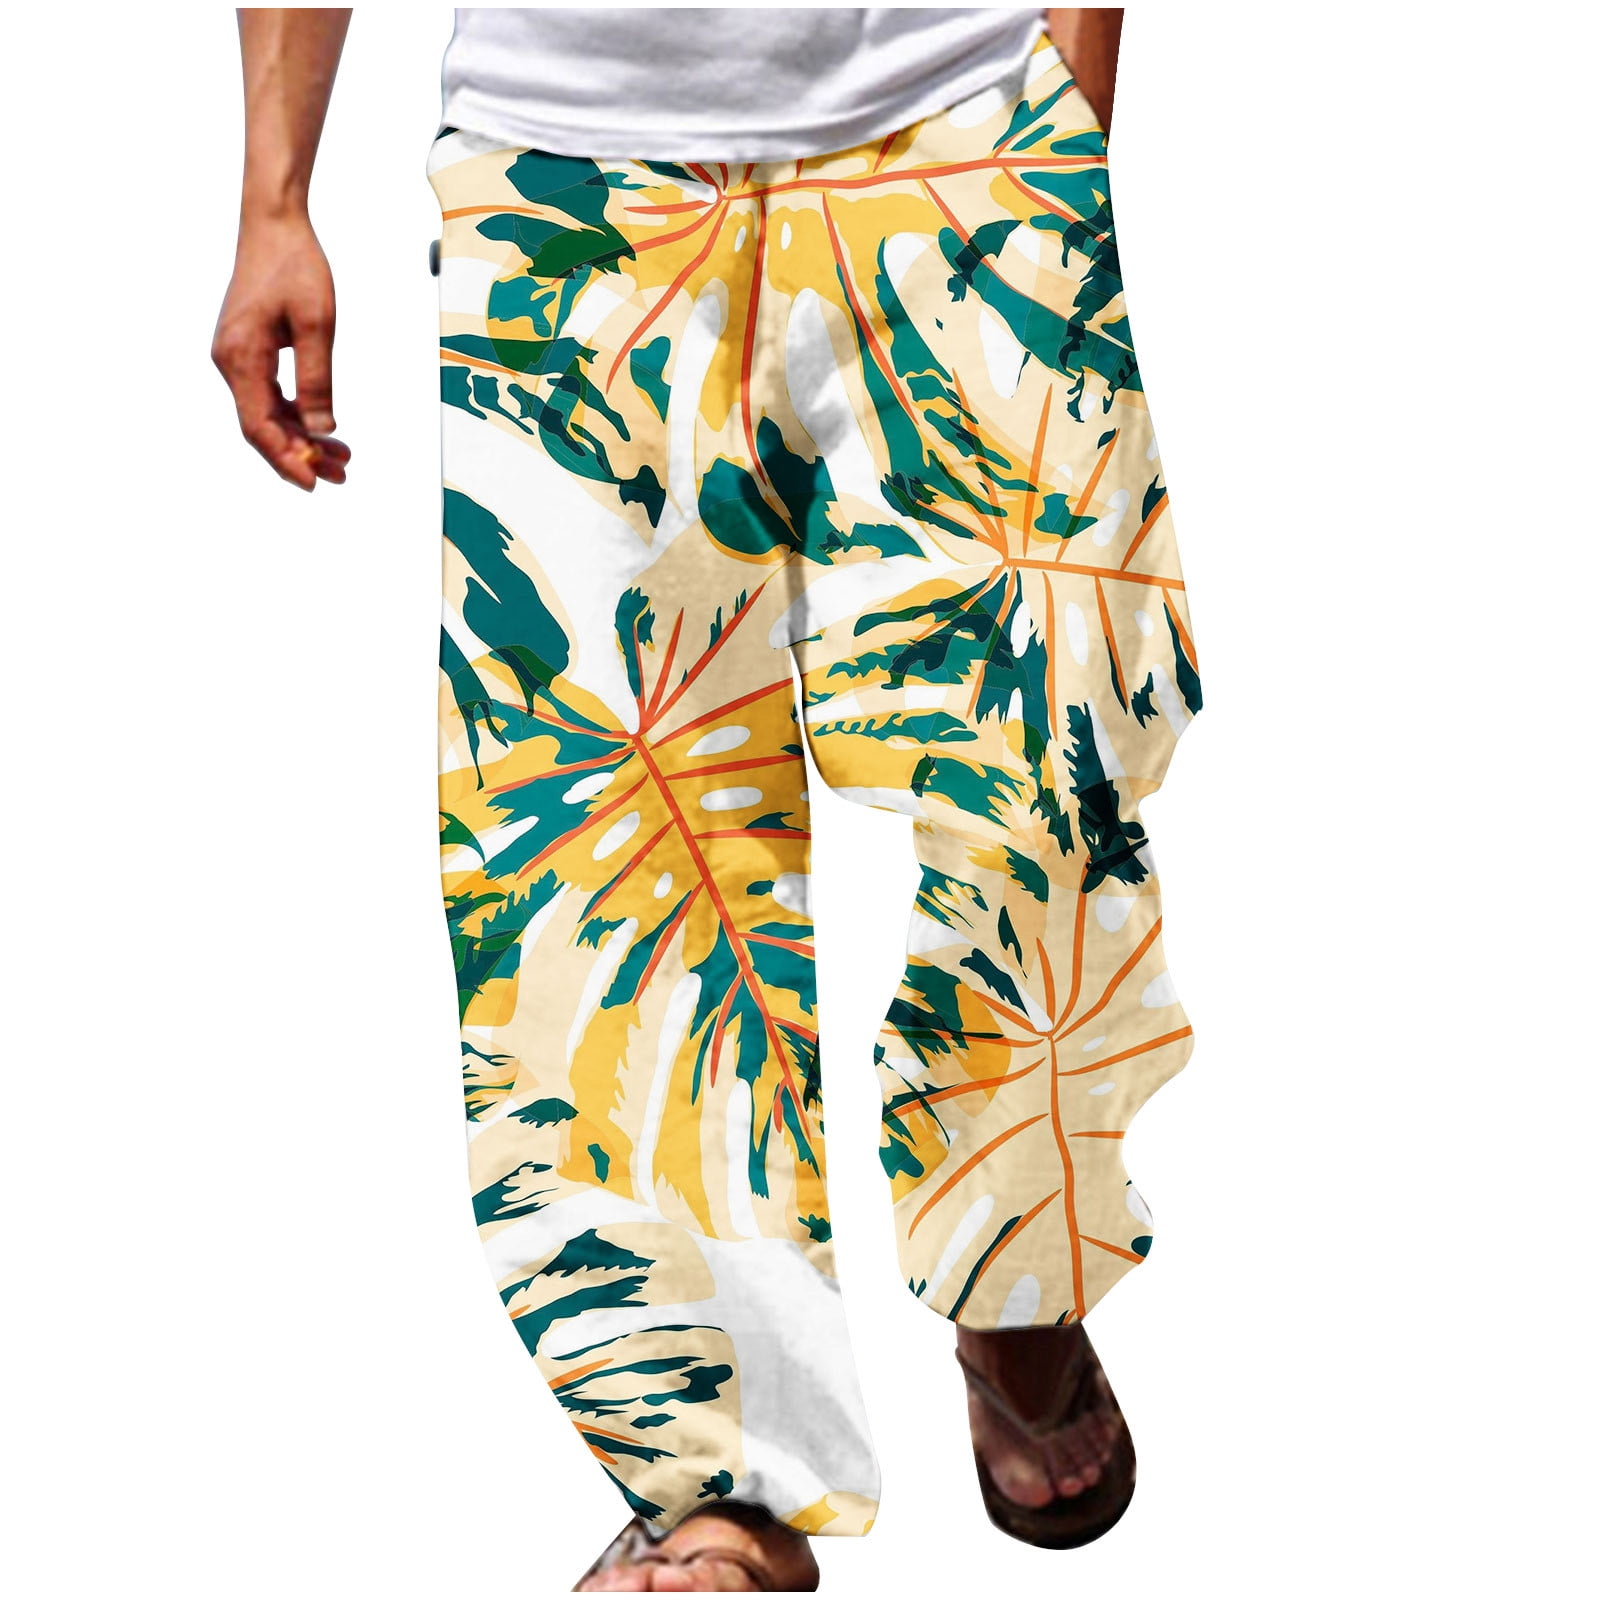 Multiclored Cotton Trousers For Men With Stamp Inspired Print  Genes  online store 2020